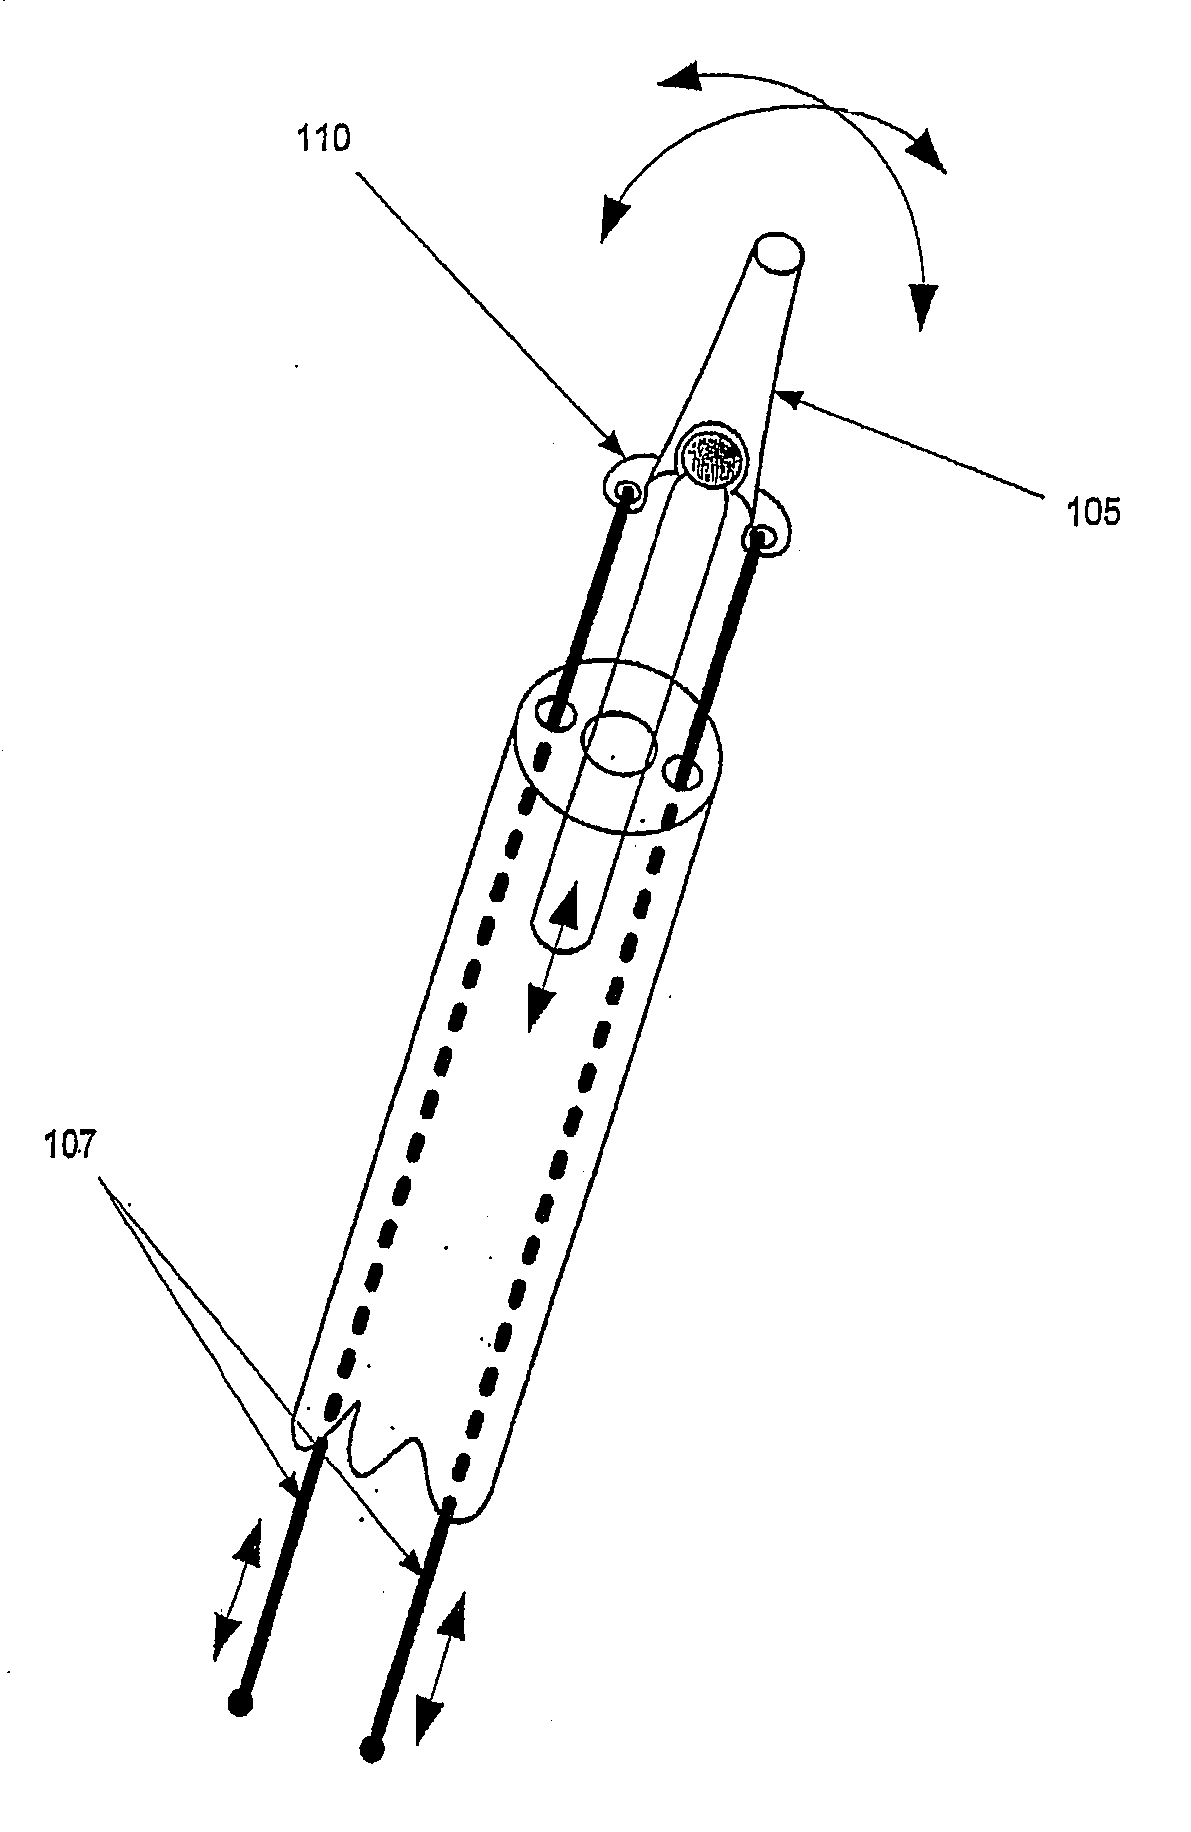 Device and method for rapid aspiration and collection of body tissue from within an enclosed body space